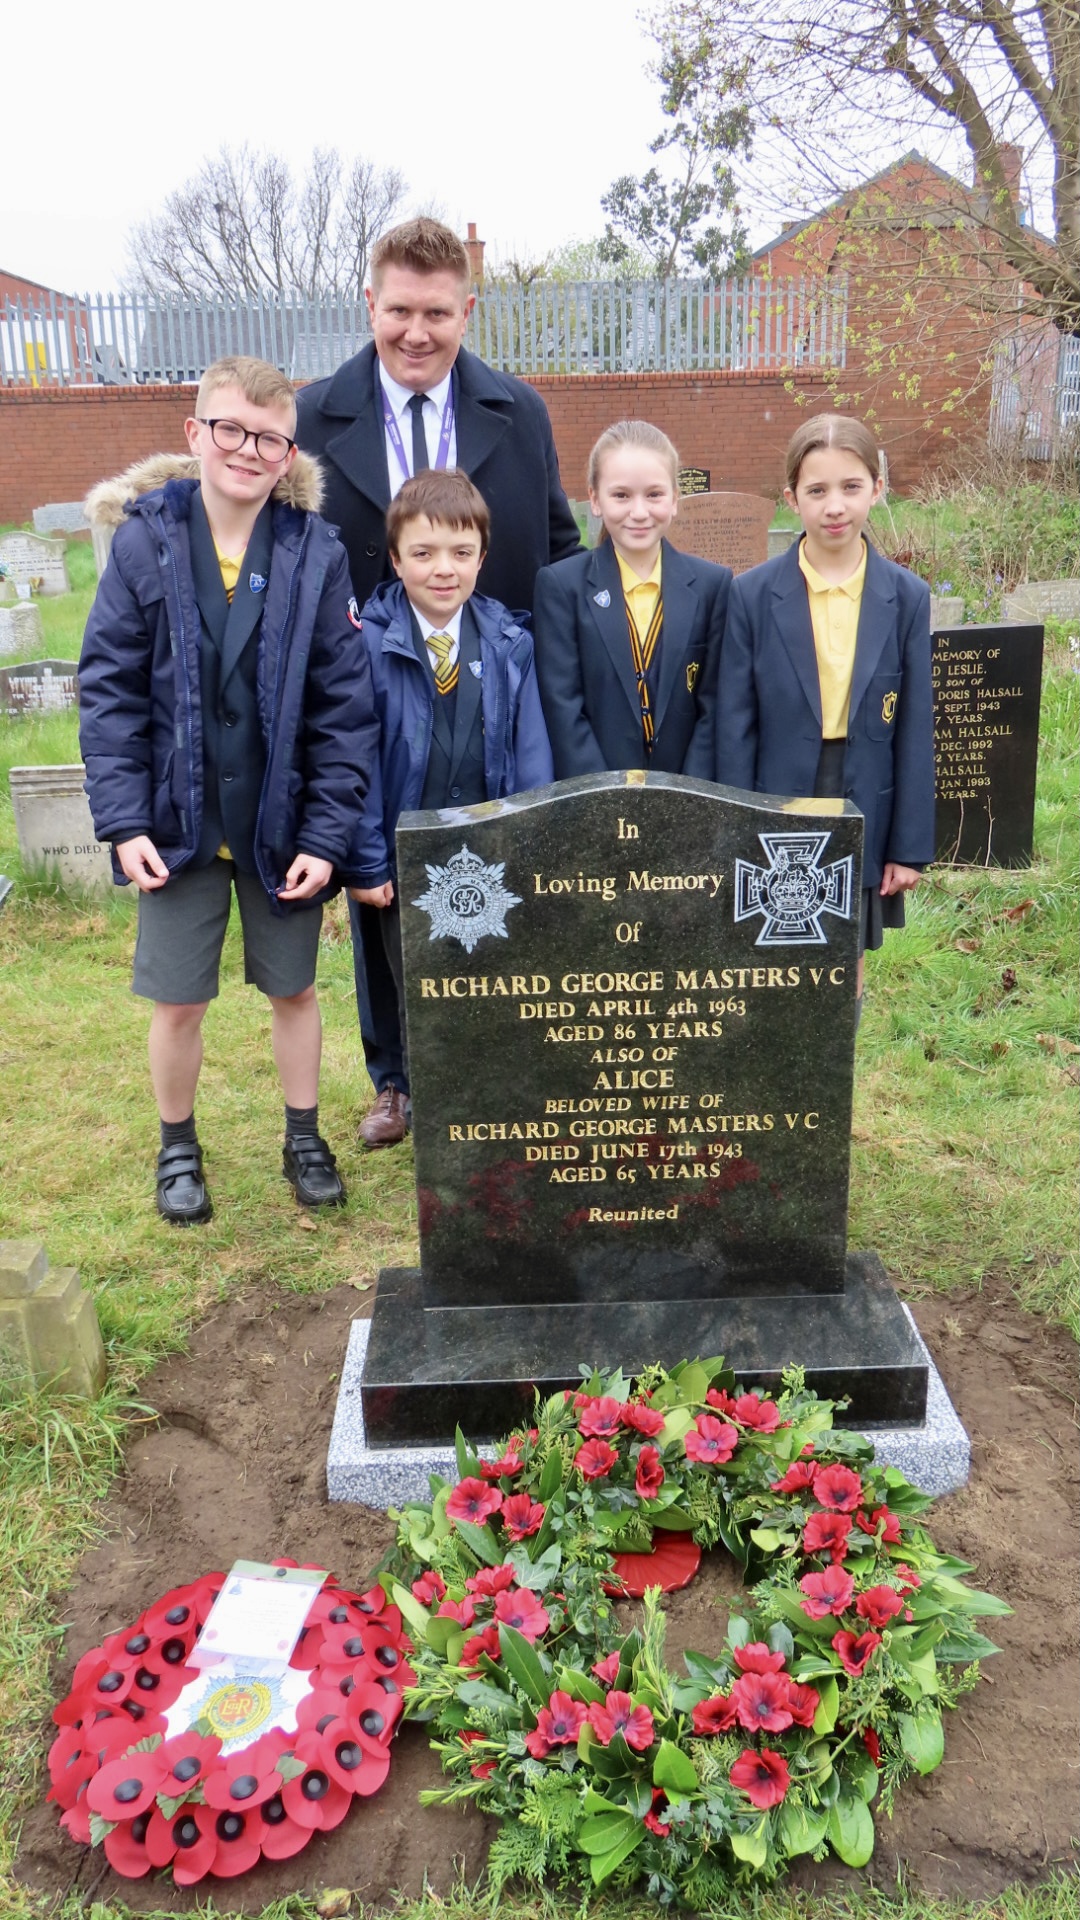 Crowds paid their respects as a new headstone was unveiled in tribute to Private Richard George Masters, from Southport, who was awarded a Victoria Cross when he saved the lives of 200 wounded British Army soldiers on 9th April 1918 during World War One. The delegation from Churchtown Primary School. Photo by Andrew Brown Stand Up For Southport